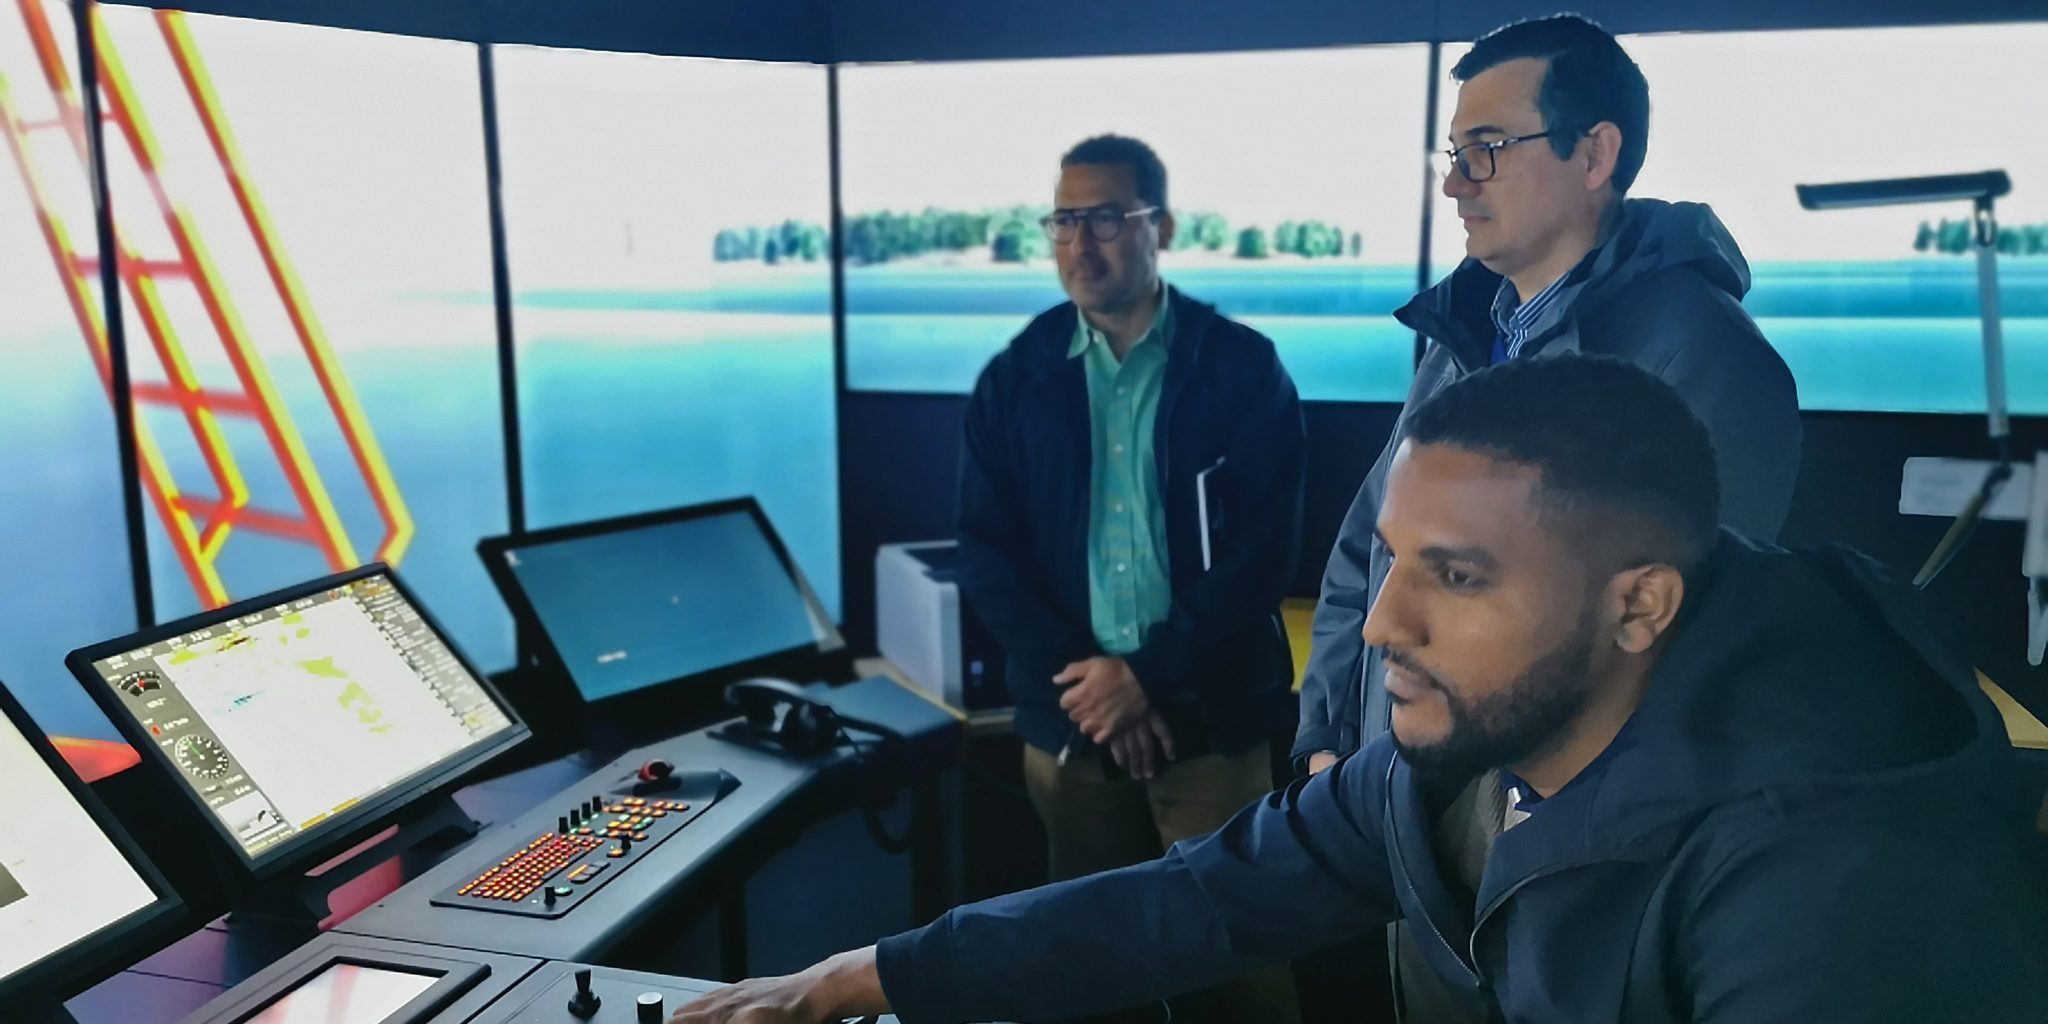 Three students from Cape Verde in the simulator room of the Rauma campus.